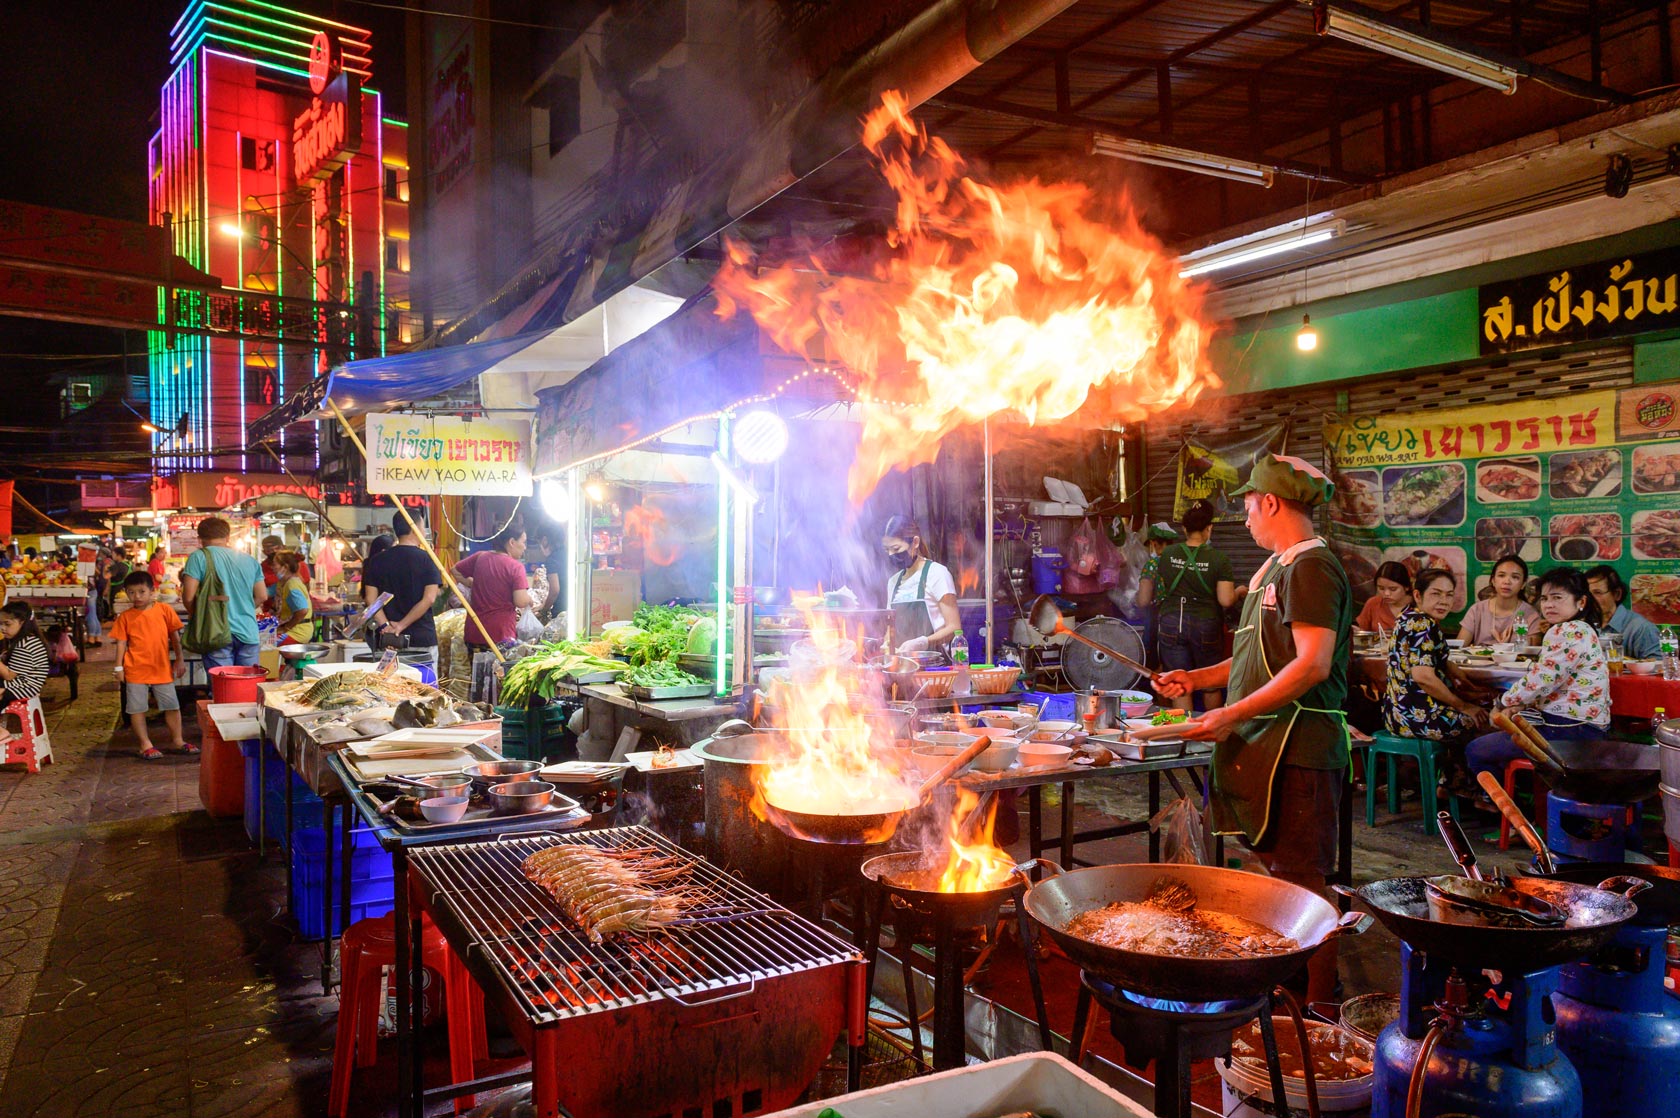 Chef cooking food at street side restaurant in Bangkok